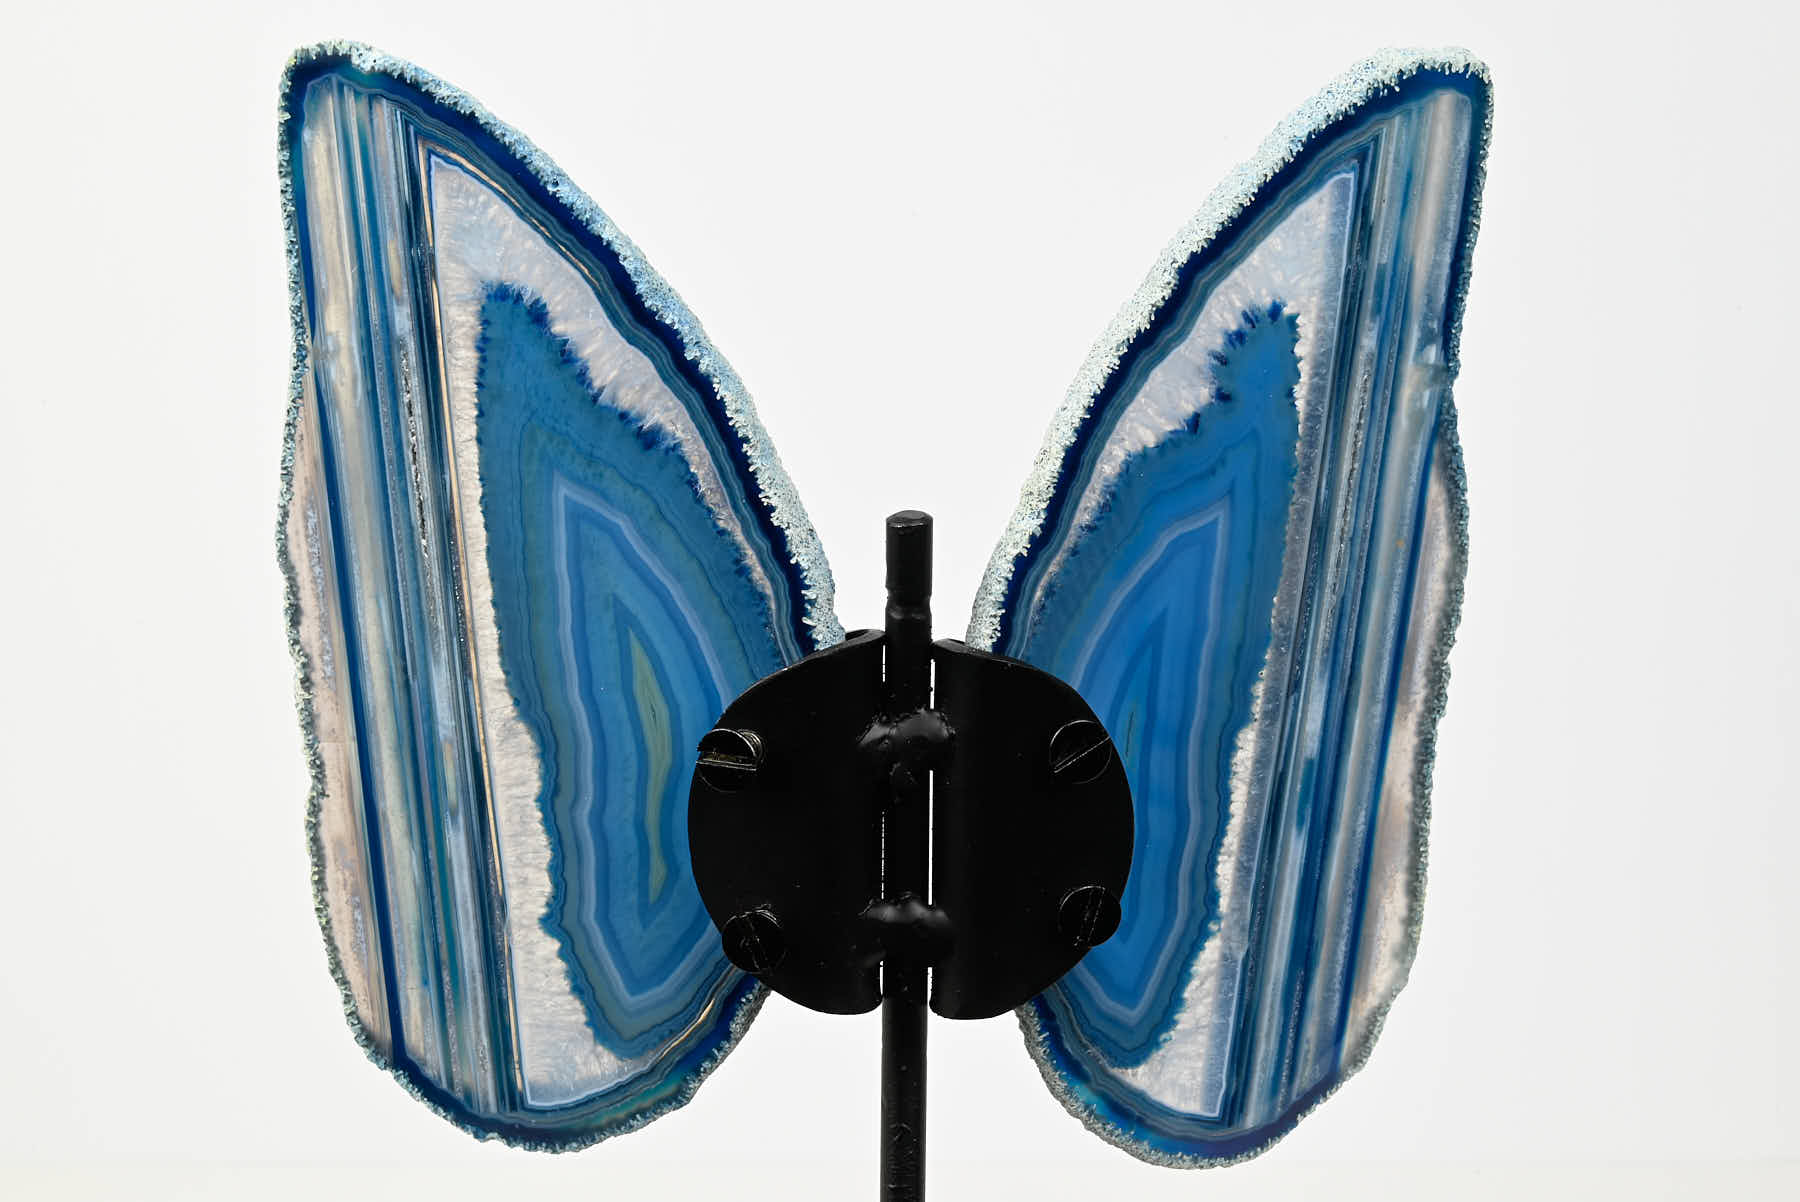 Blue Agate Butterfly on Stand - 0.56kg and 21cm Tall - #BUBLUE-10014